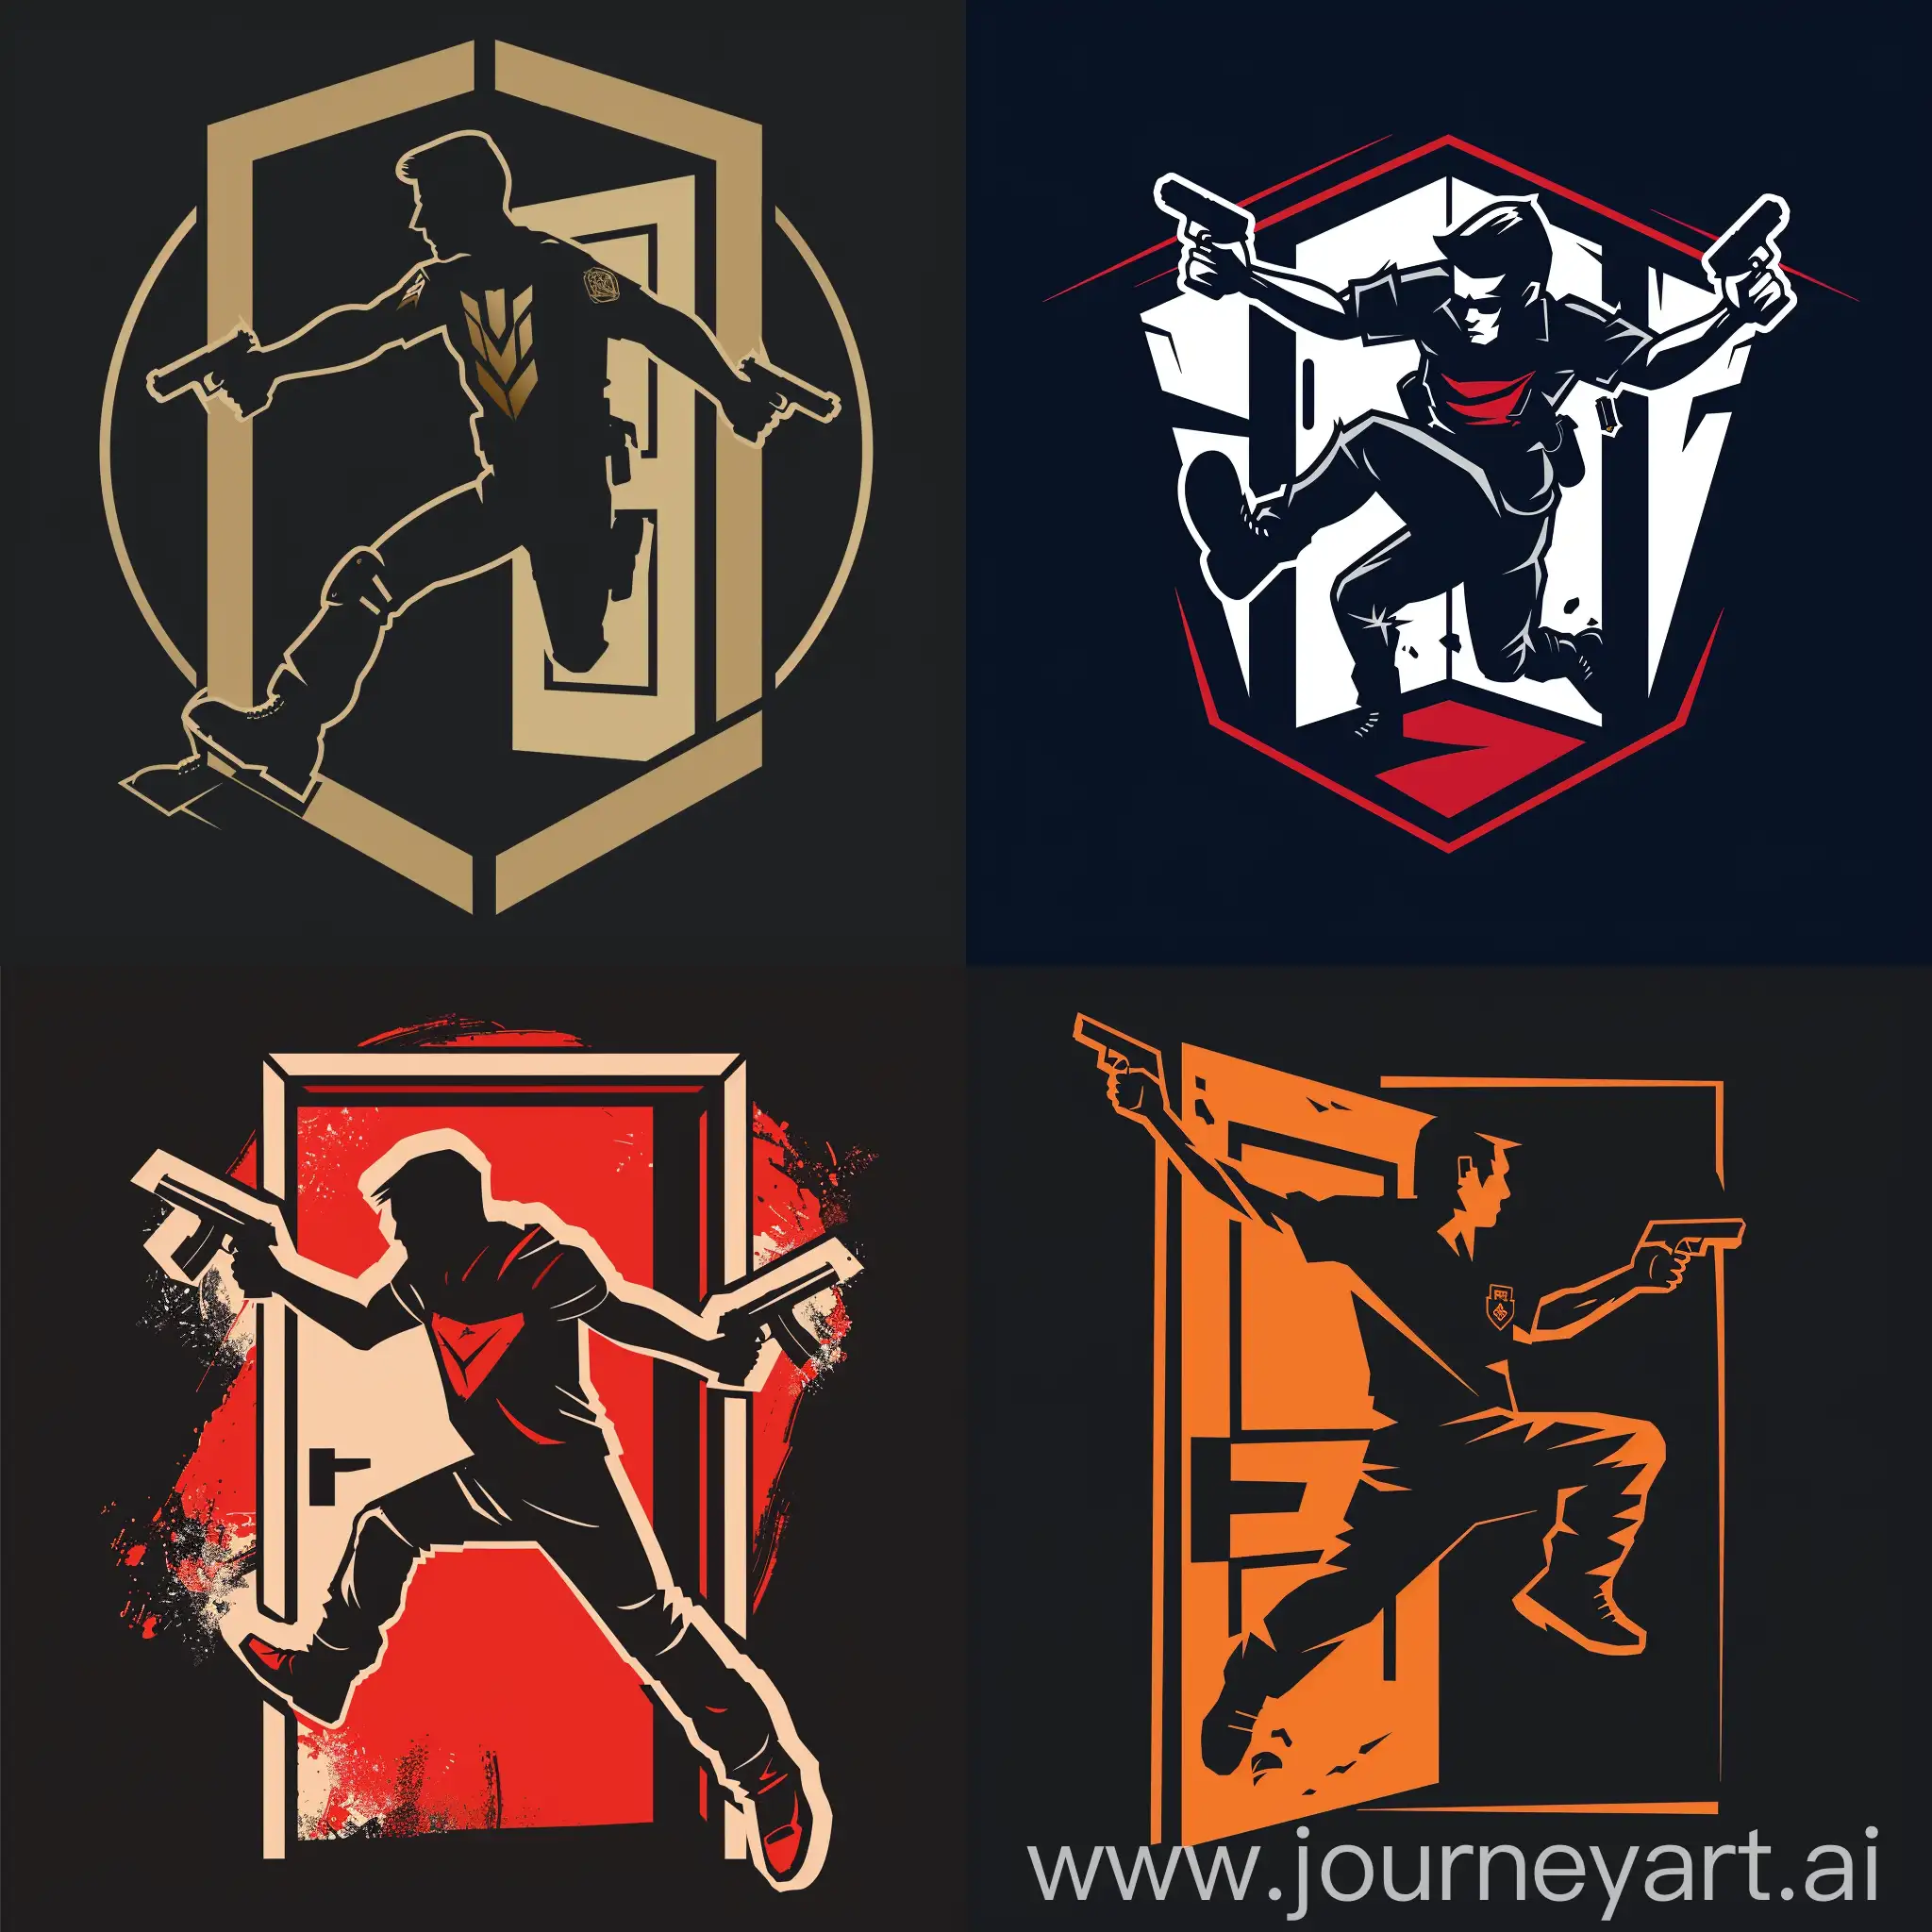 a logo for an e-sport FPS team picturing man kicking a door and holding a gun in each hand